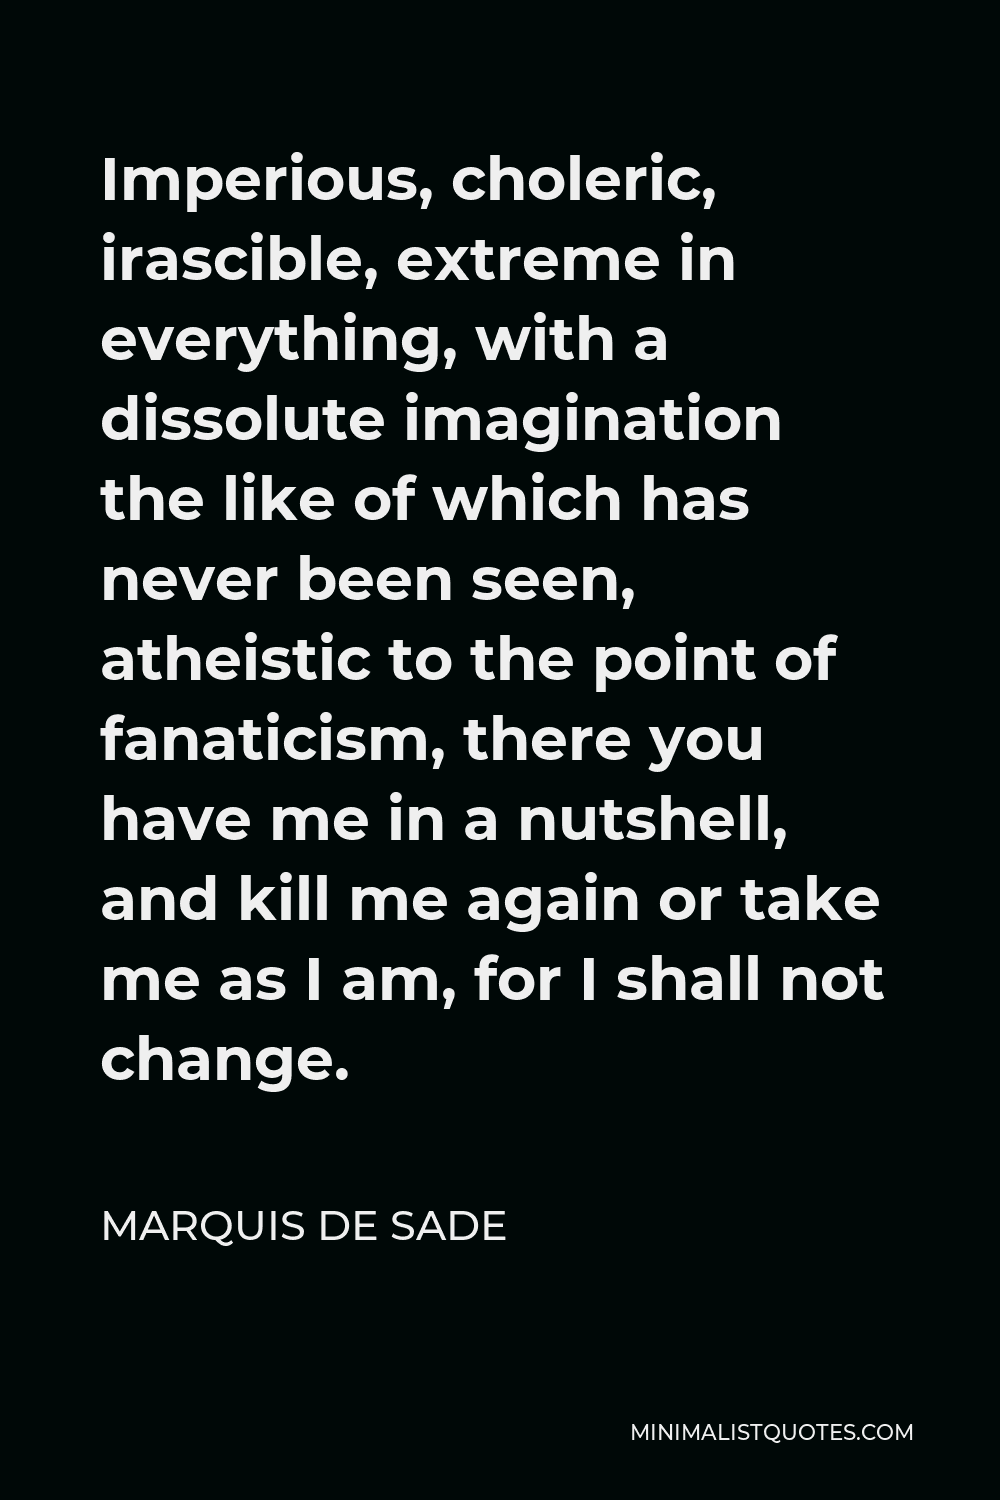 Marquis de Sade Quote - Imperious, choleric, irascible, extreme in everything, with a dissolute imagination the like of which has never been seen, atheistic to the point of fanaticism, there you have me in a nutshell, and kill me again or take me as I am, for I shall not change.